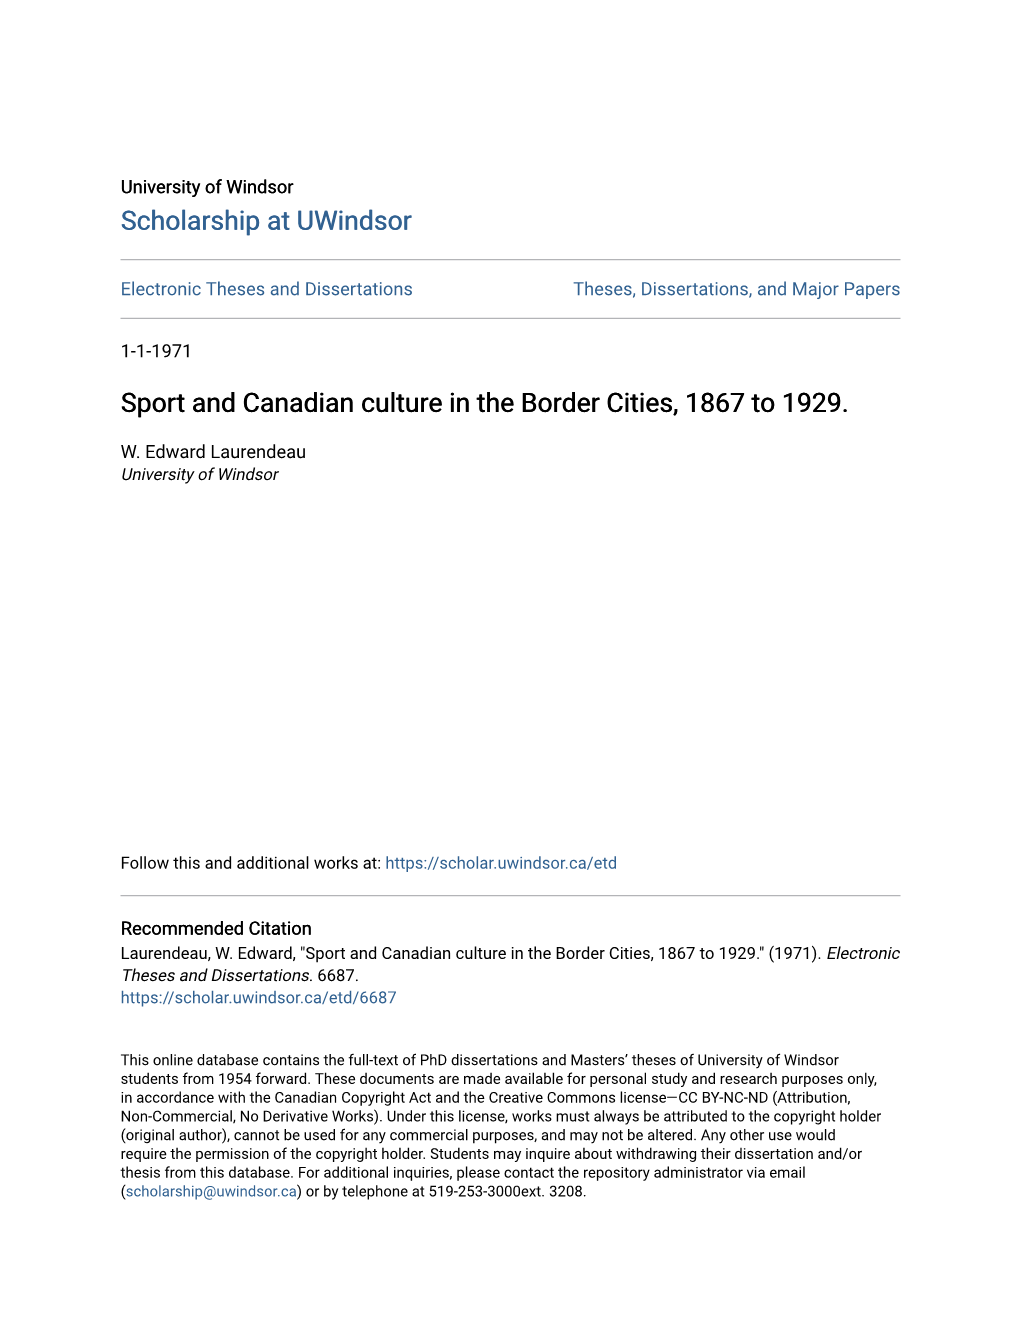 Sport and Canadian Culture in the Border Cities, 1867 to 1929